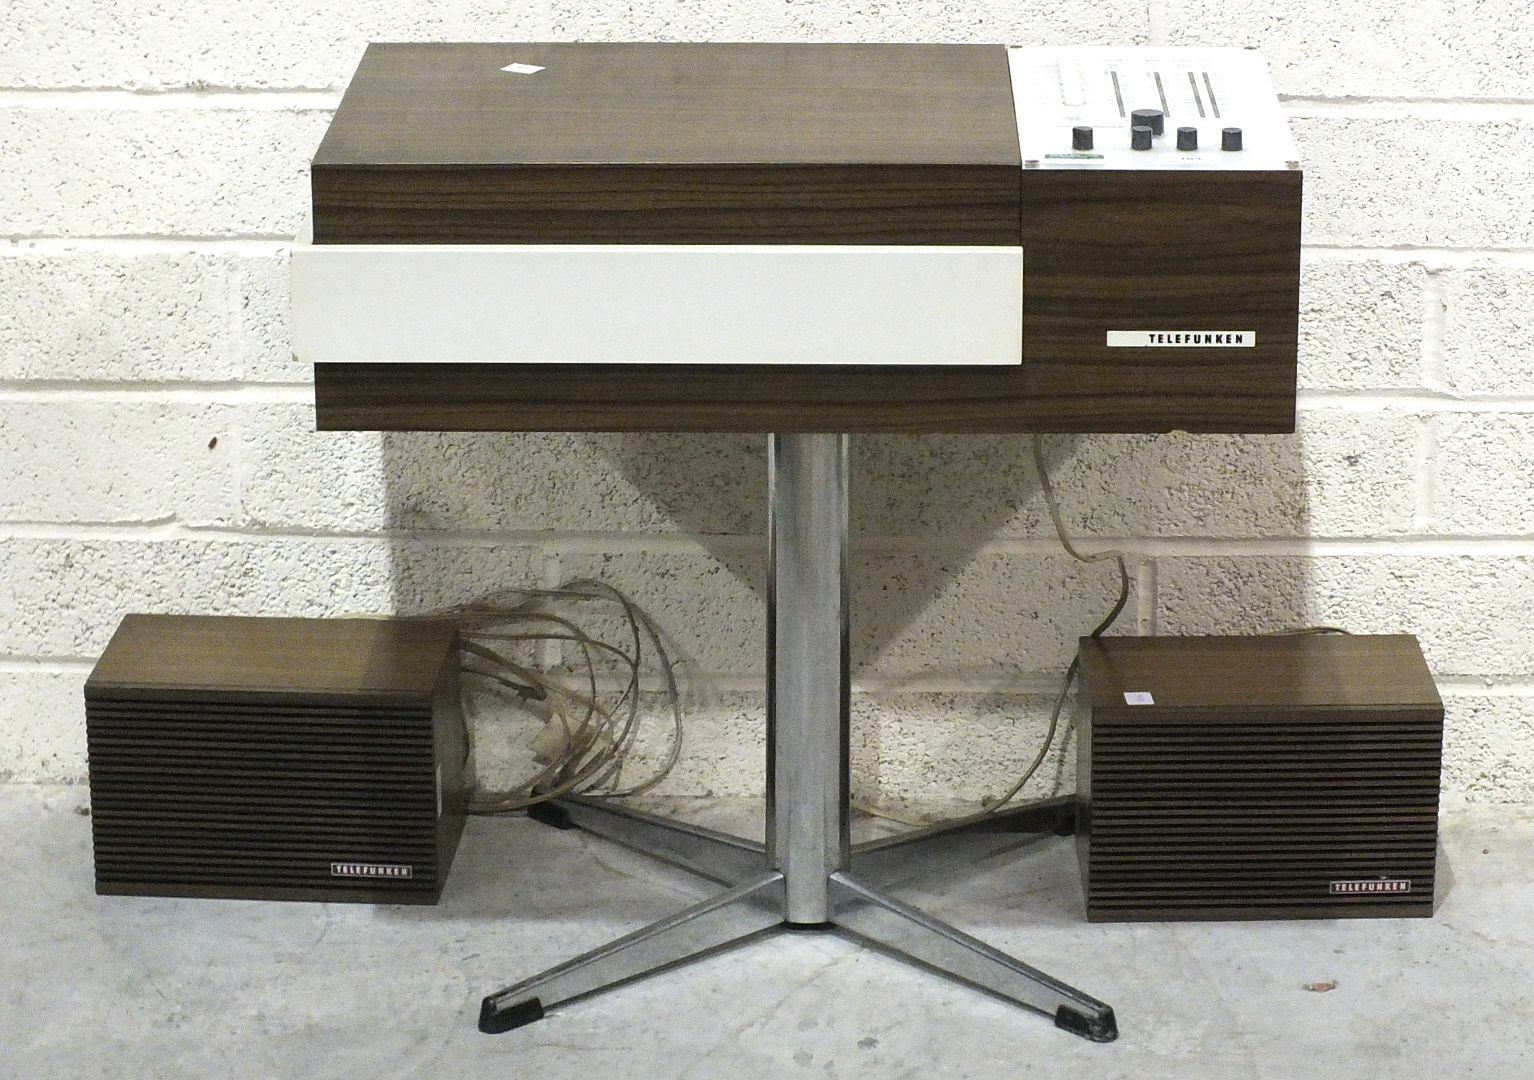 A Telefunken Rondo Stereo 101, in wood-finished case, on chrome stand, with a pair of speakers.